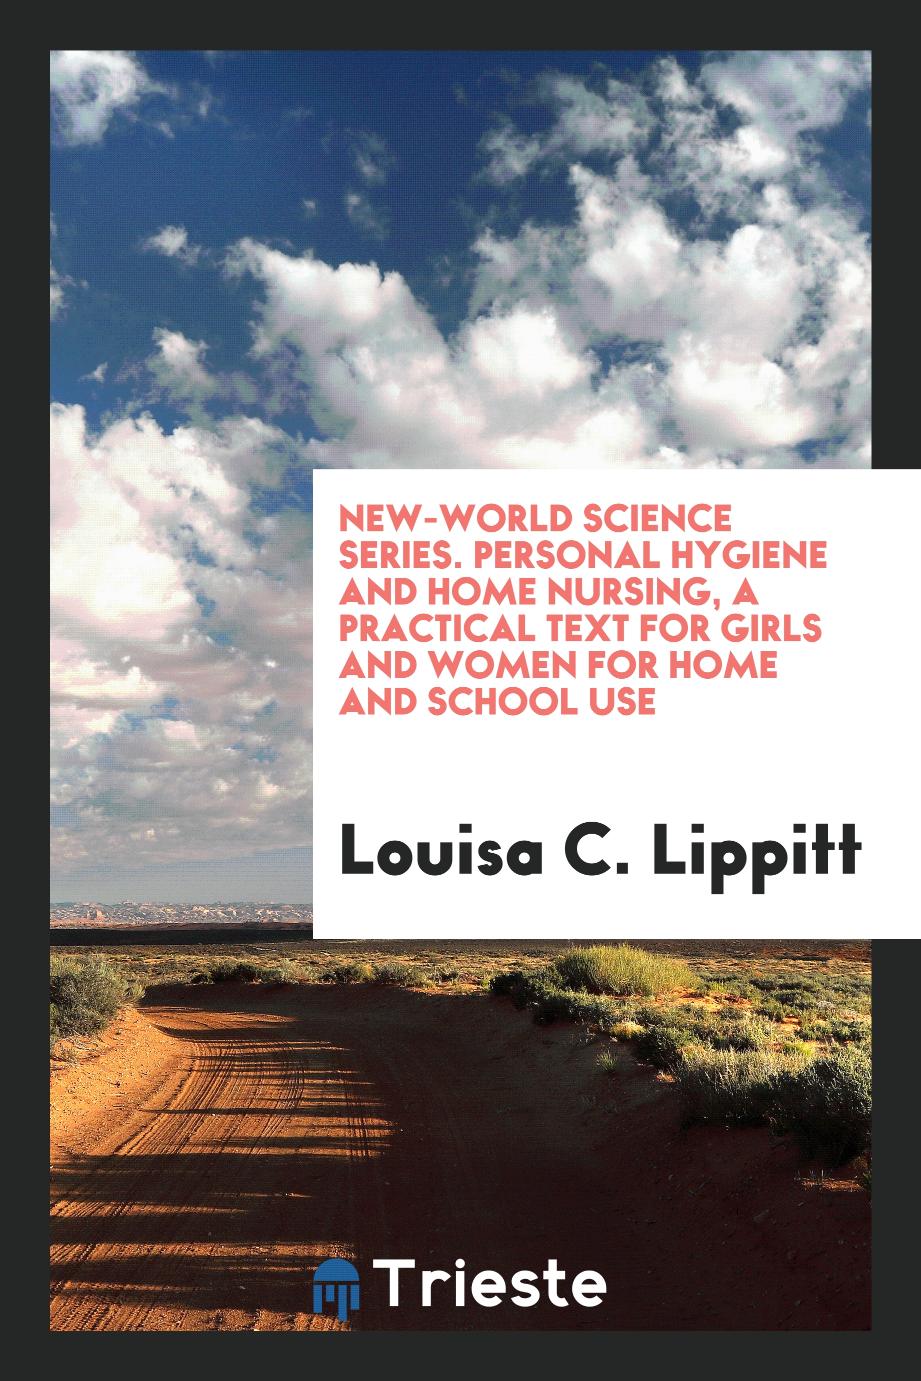 New-World science series. Personal hygiene and home nursing, a practical text for girls and women for home and school use